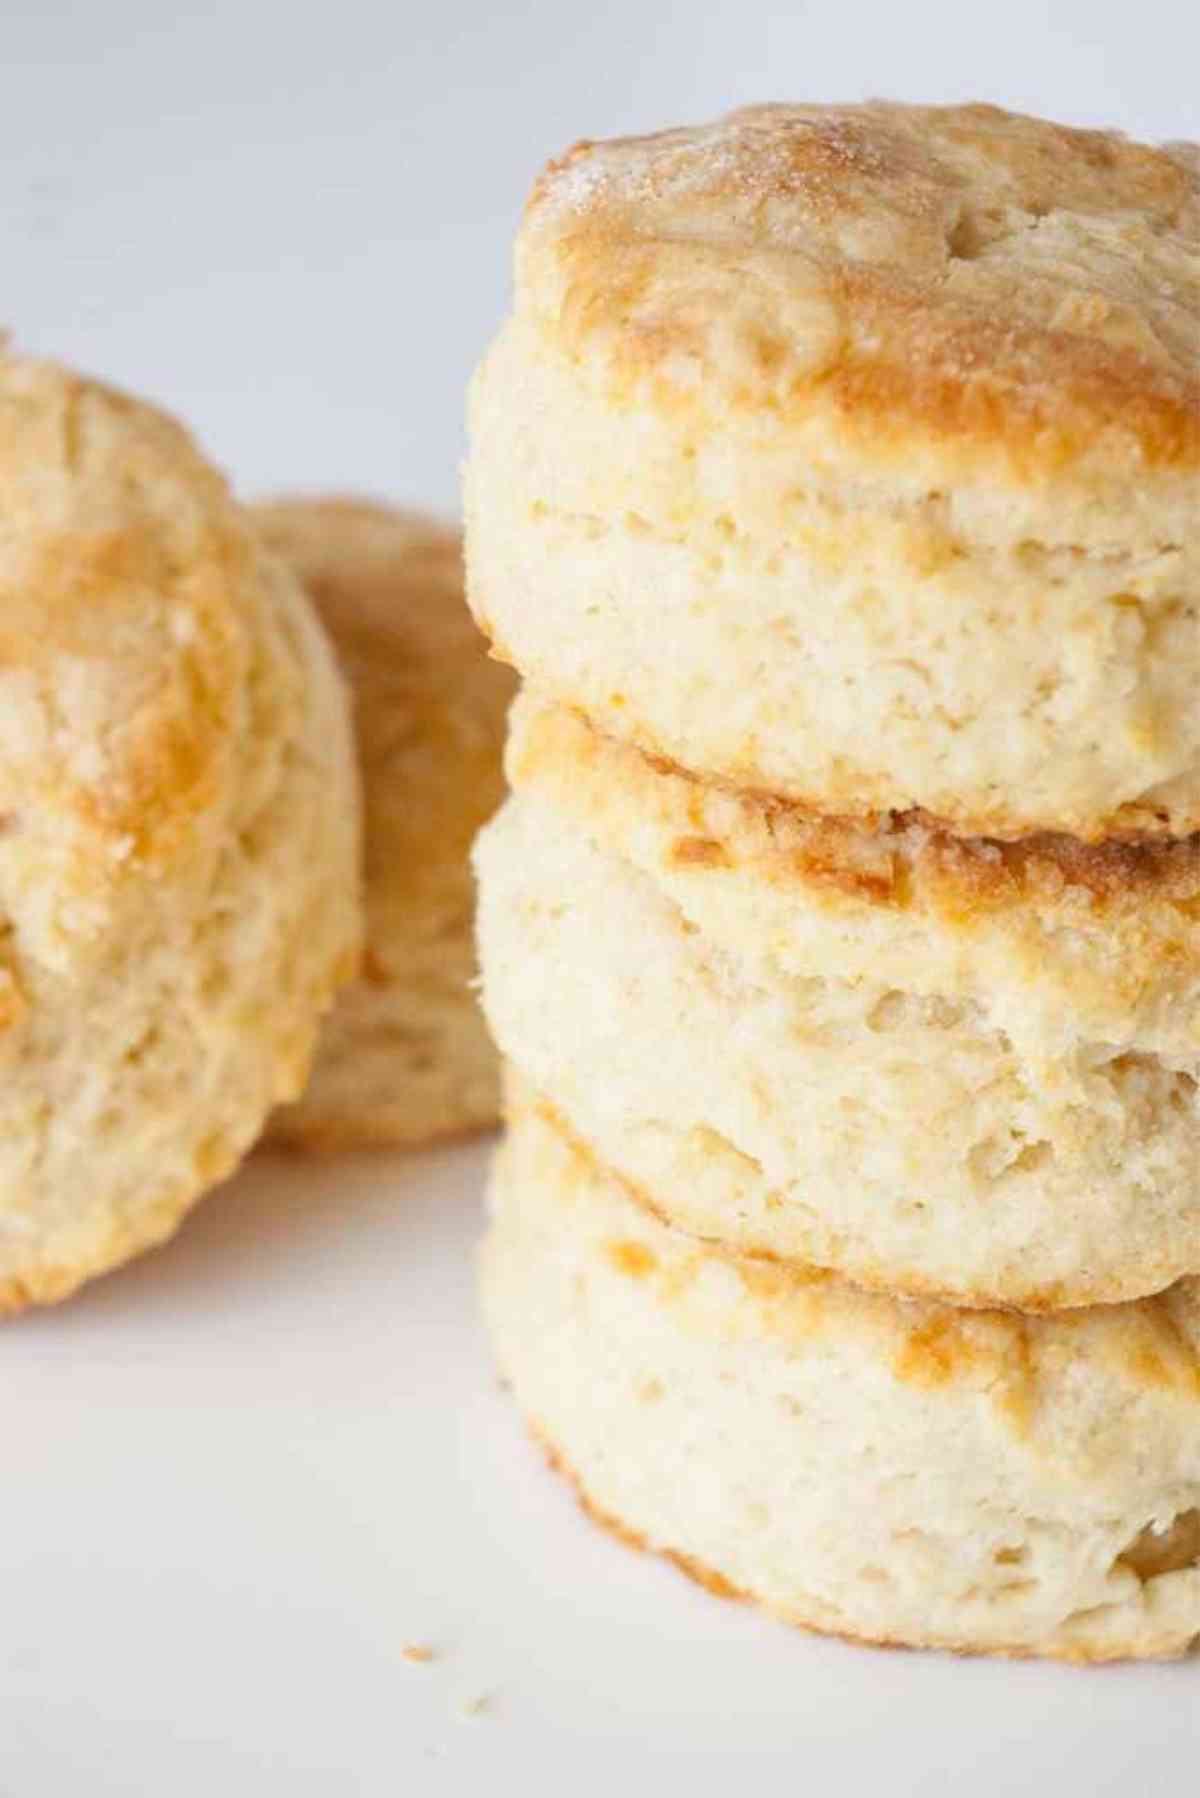 A stack of 3 buttermilk biscuits.